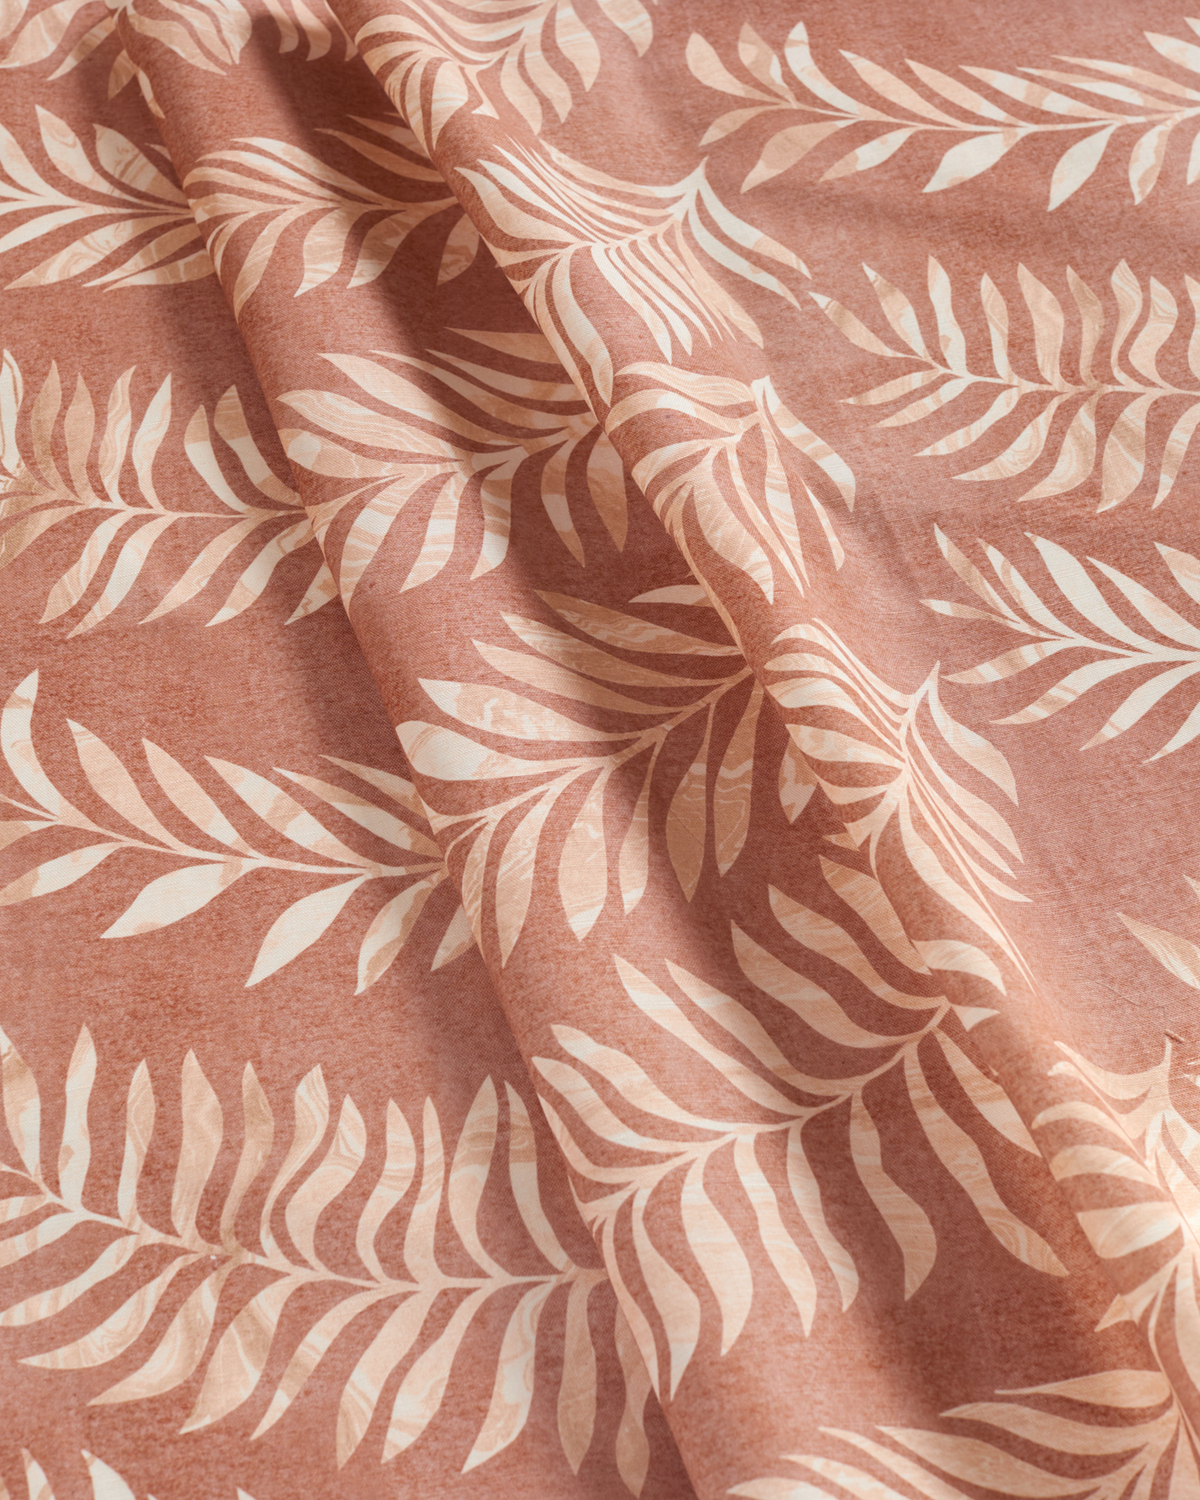 Marble Fern Fabric in Canyon